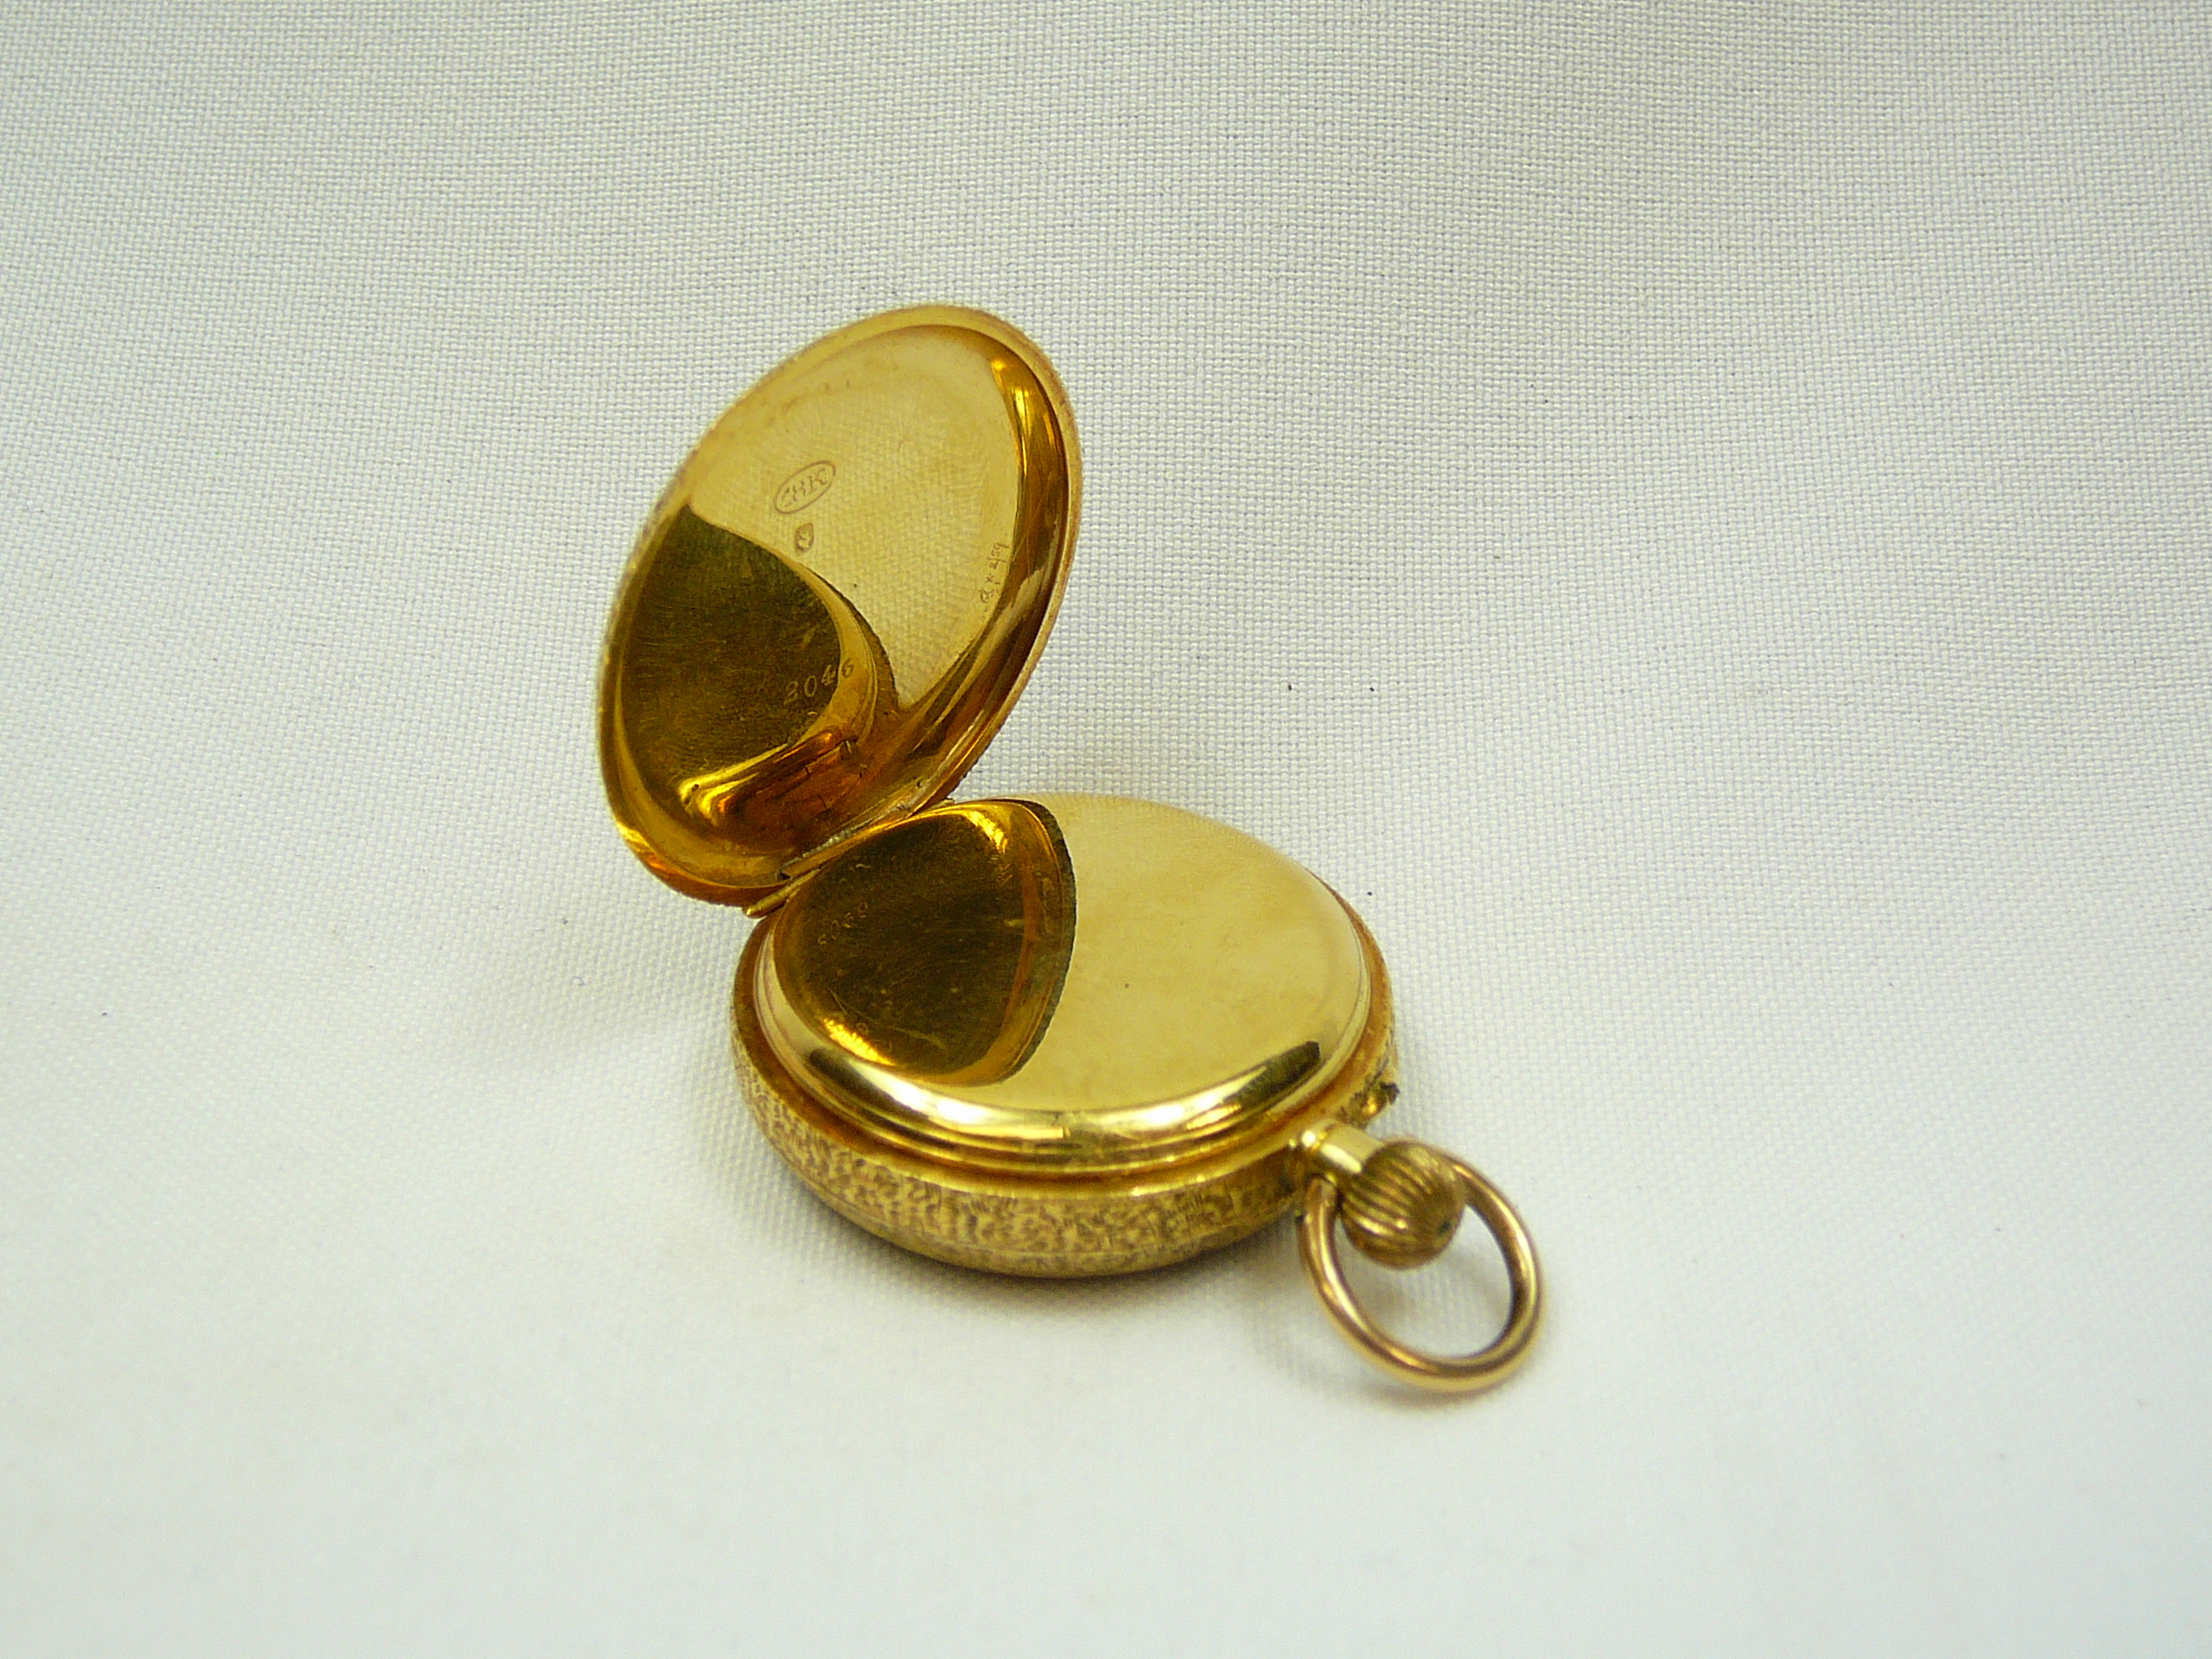 Ladies Antique Gold Fob Watch - Image 3 of 4